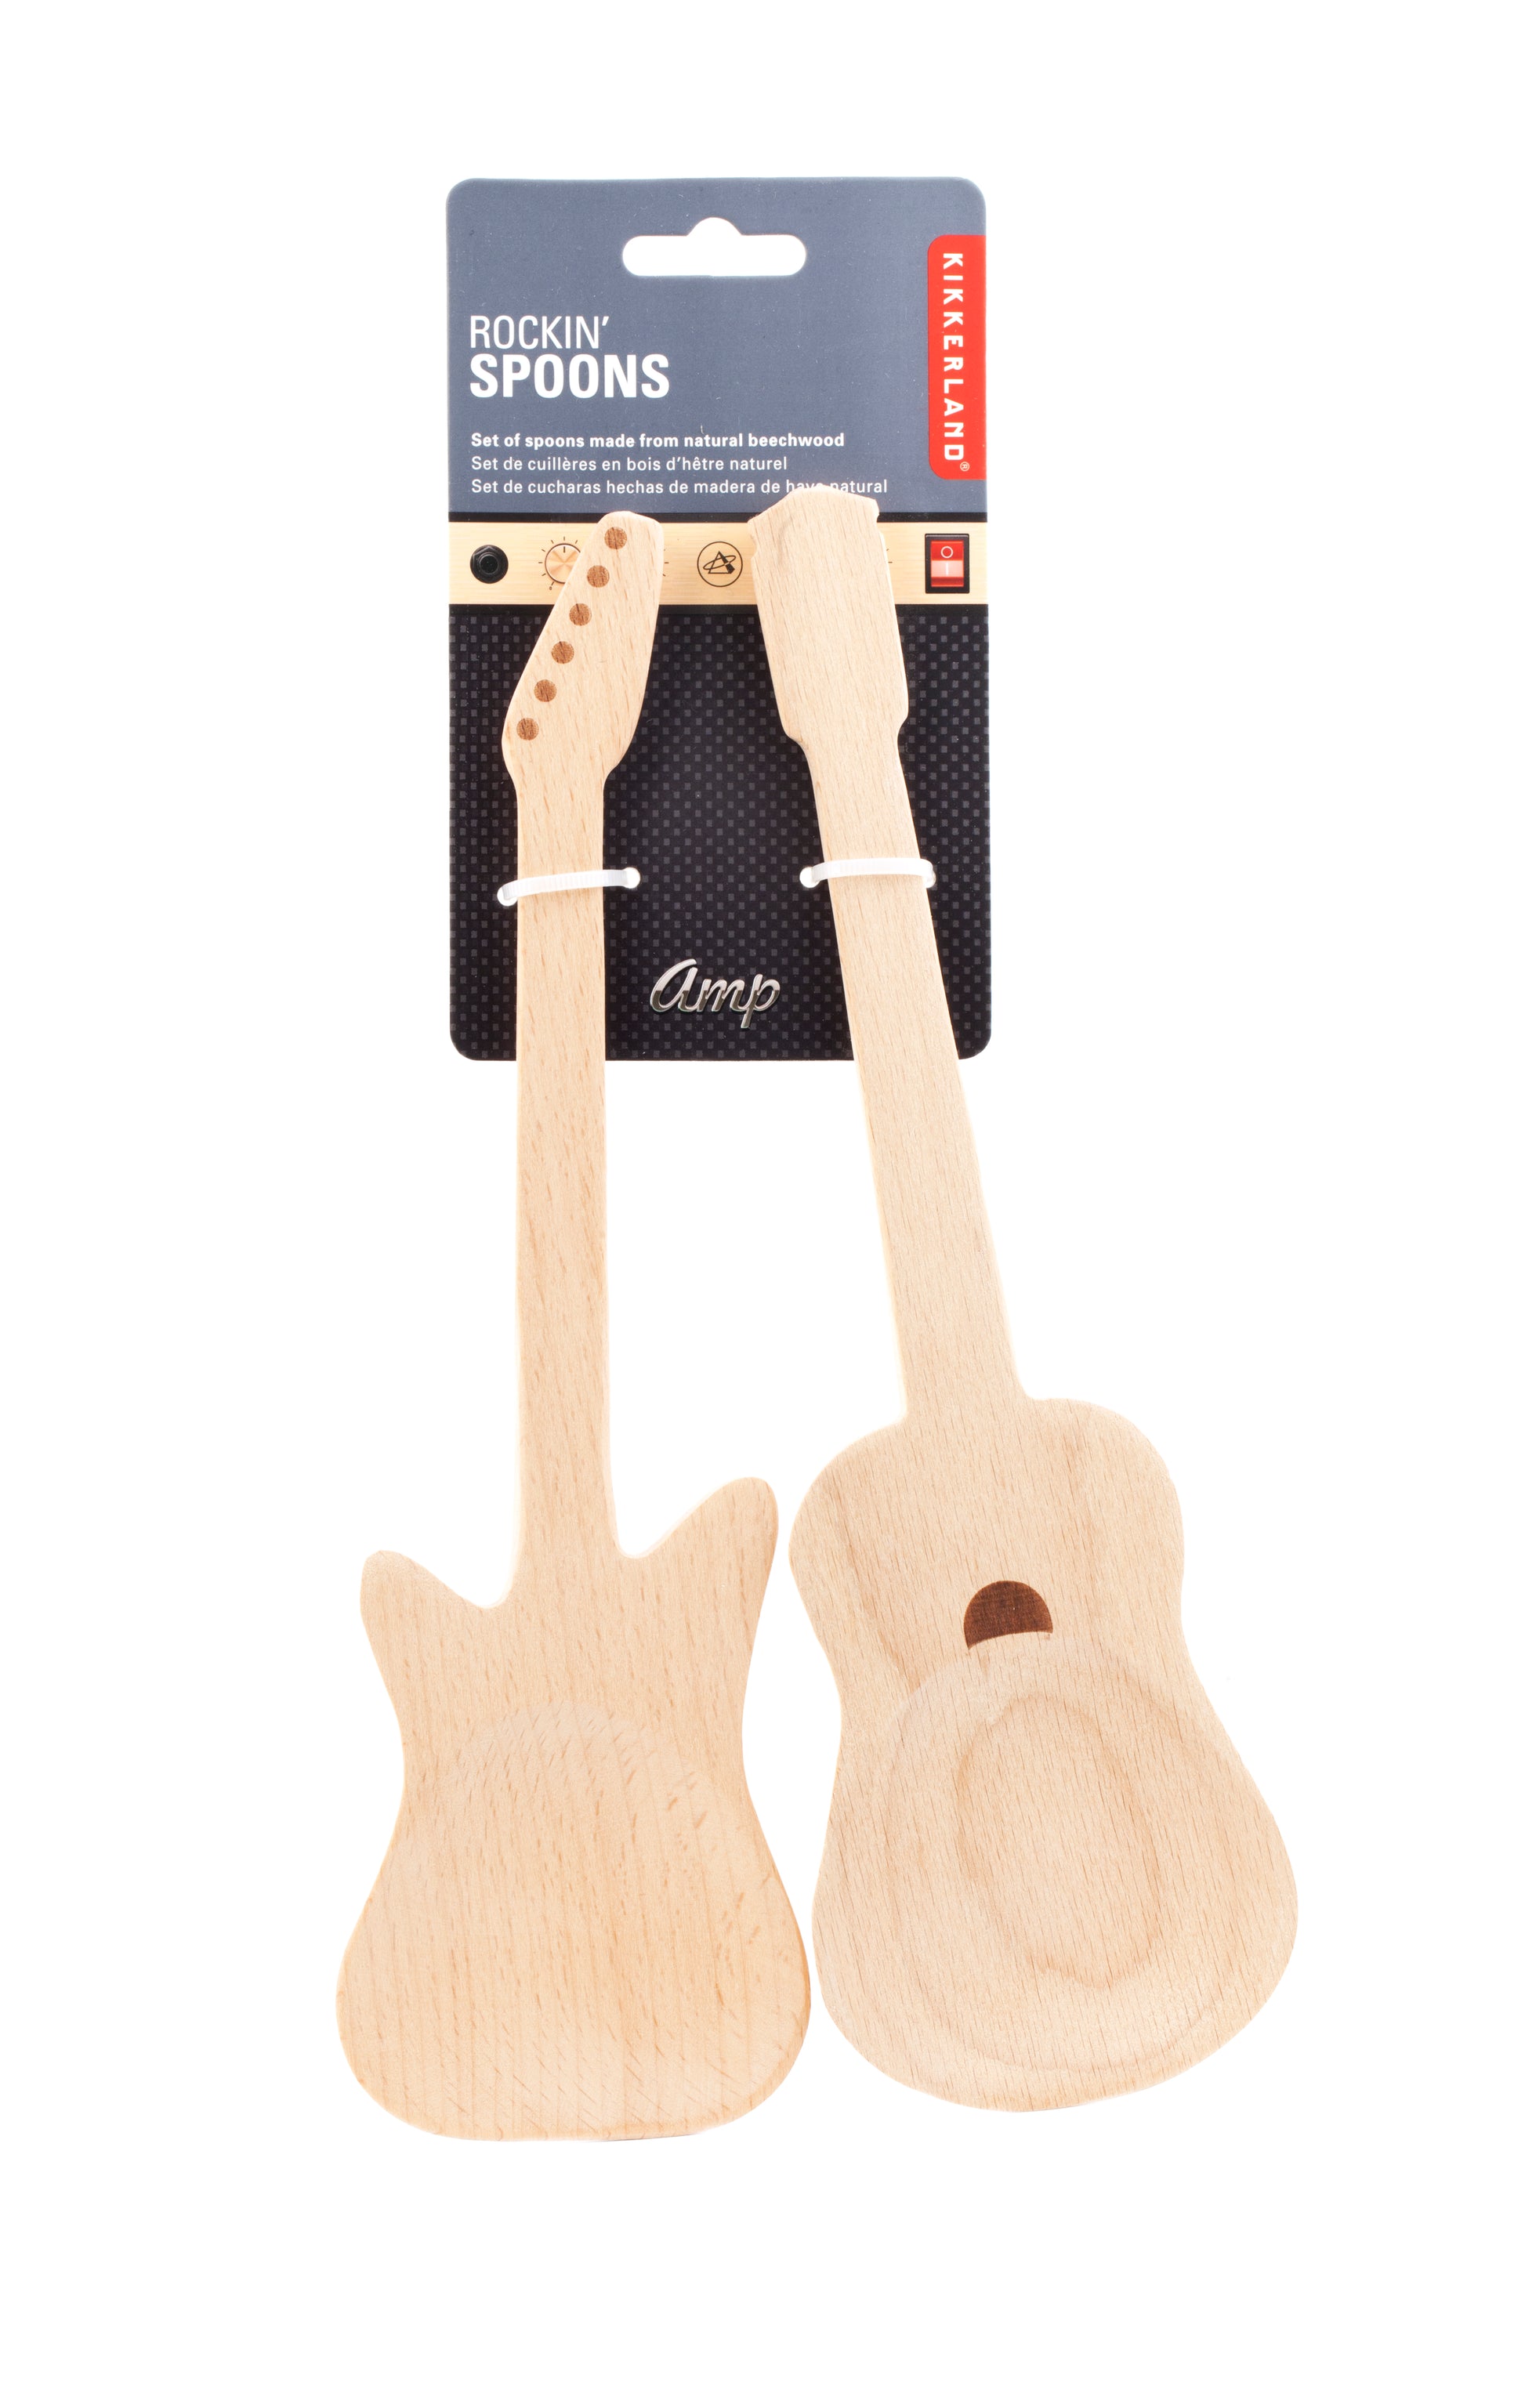 Two guitar shaped spoons in packaging